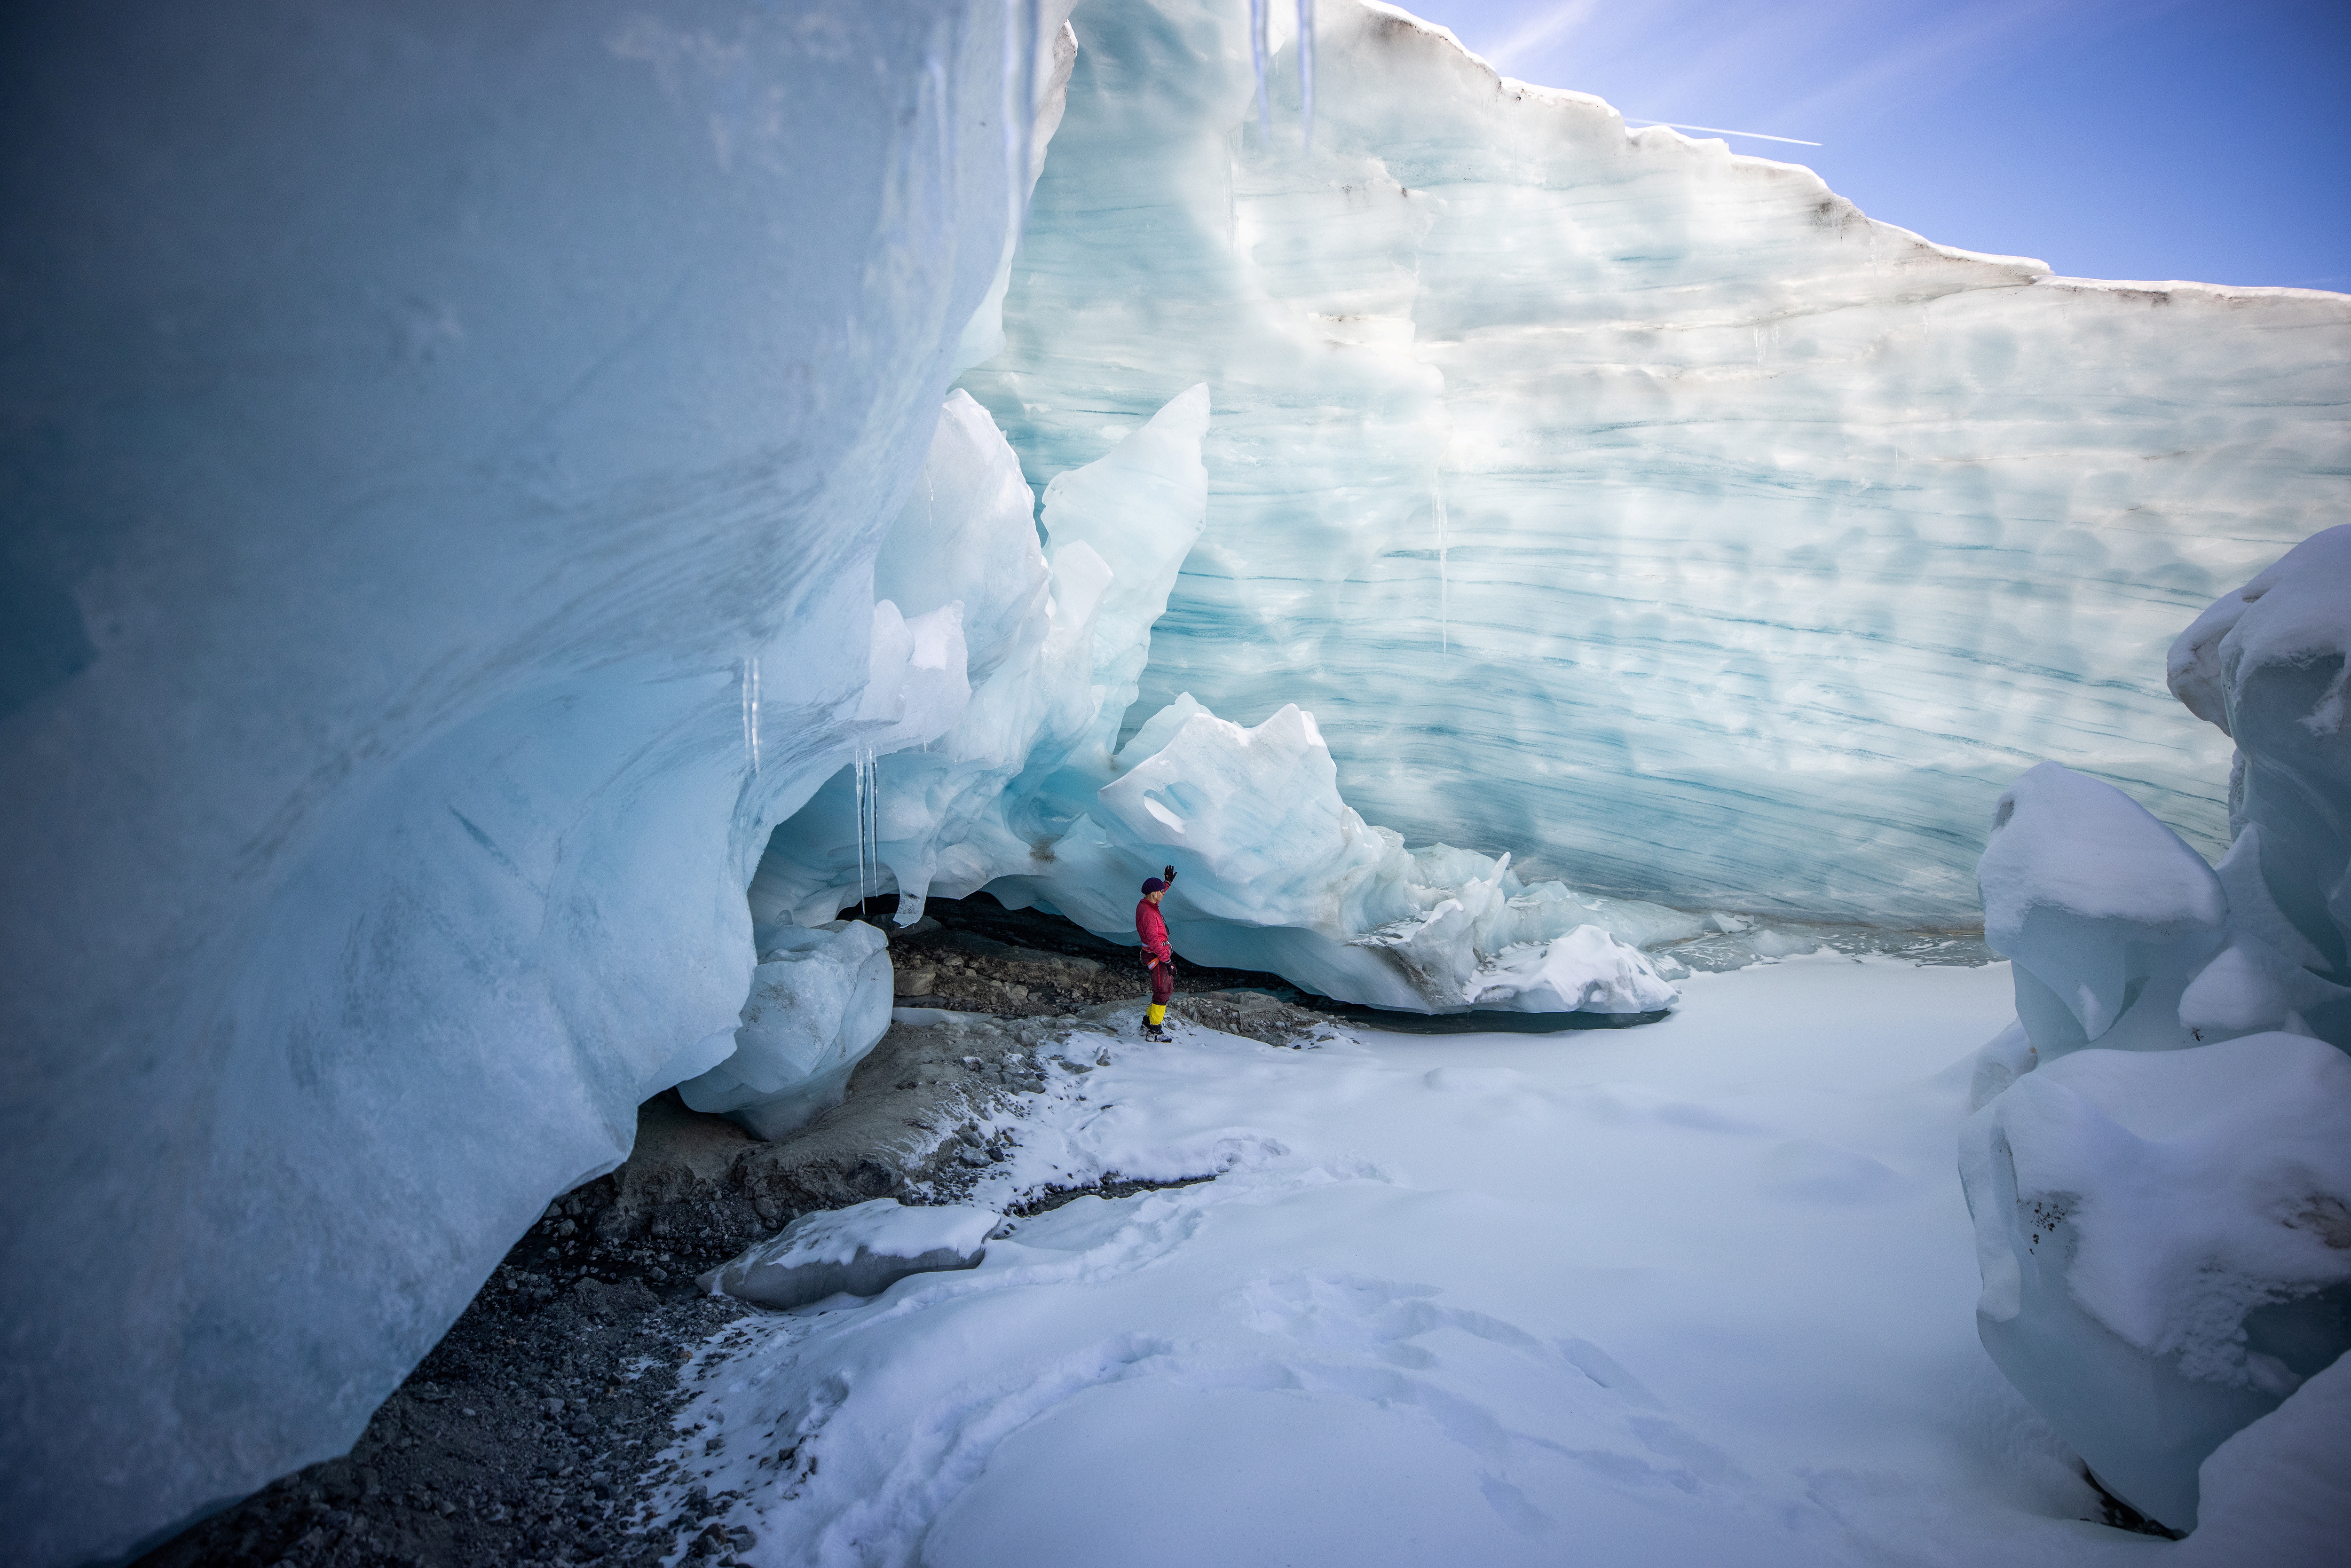 Glaciologist Andrea Fischer, from the Austrian Academy of Sciences, stands at the entrance of a natural glacier cavity of the Jamtalferner glacier near Galtuer, Austria, October 15, 2021. Giant ice caves have appeared in glaciers accelerating the melting process faster than expected as warmer air rushes through the ice mass until it collapses. Picture taken October 15, 2021. REUTERS/Lisi Niesner